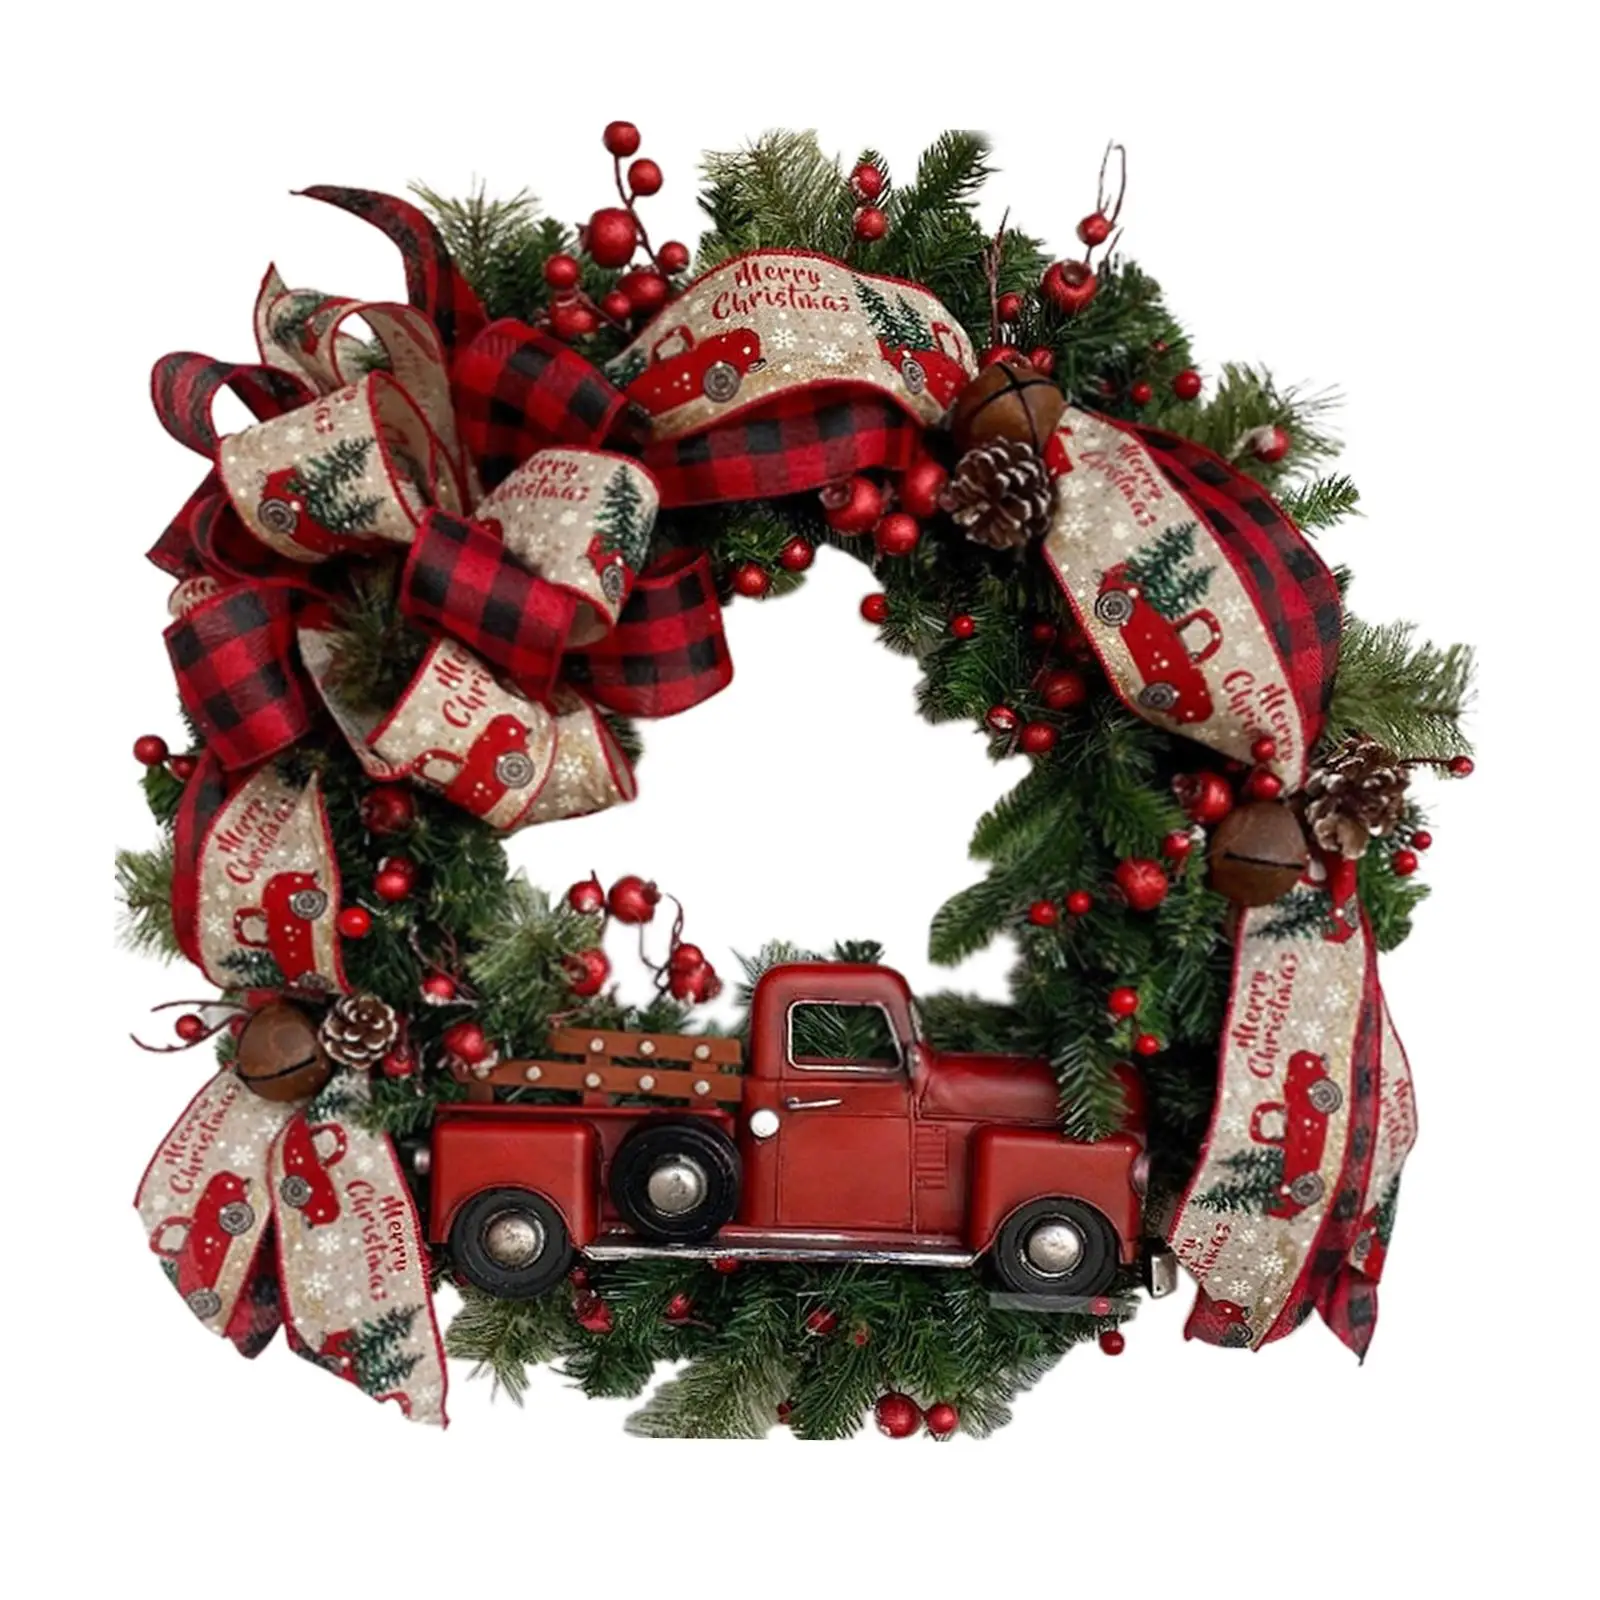 Christmas Artificial Wreath Red Car Decor Simulation Red Berries Green Leaves Wreath for Holiday Wedding Outdoor Garden Xmas